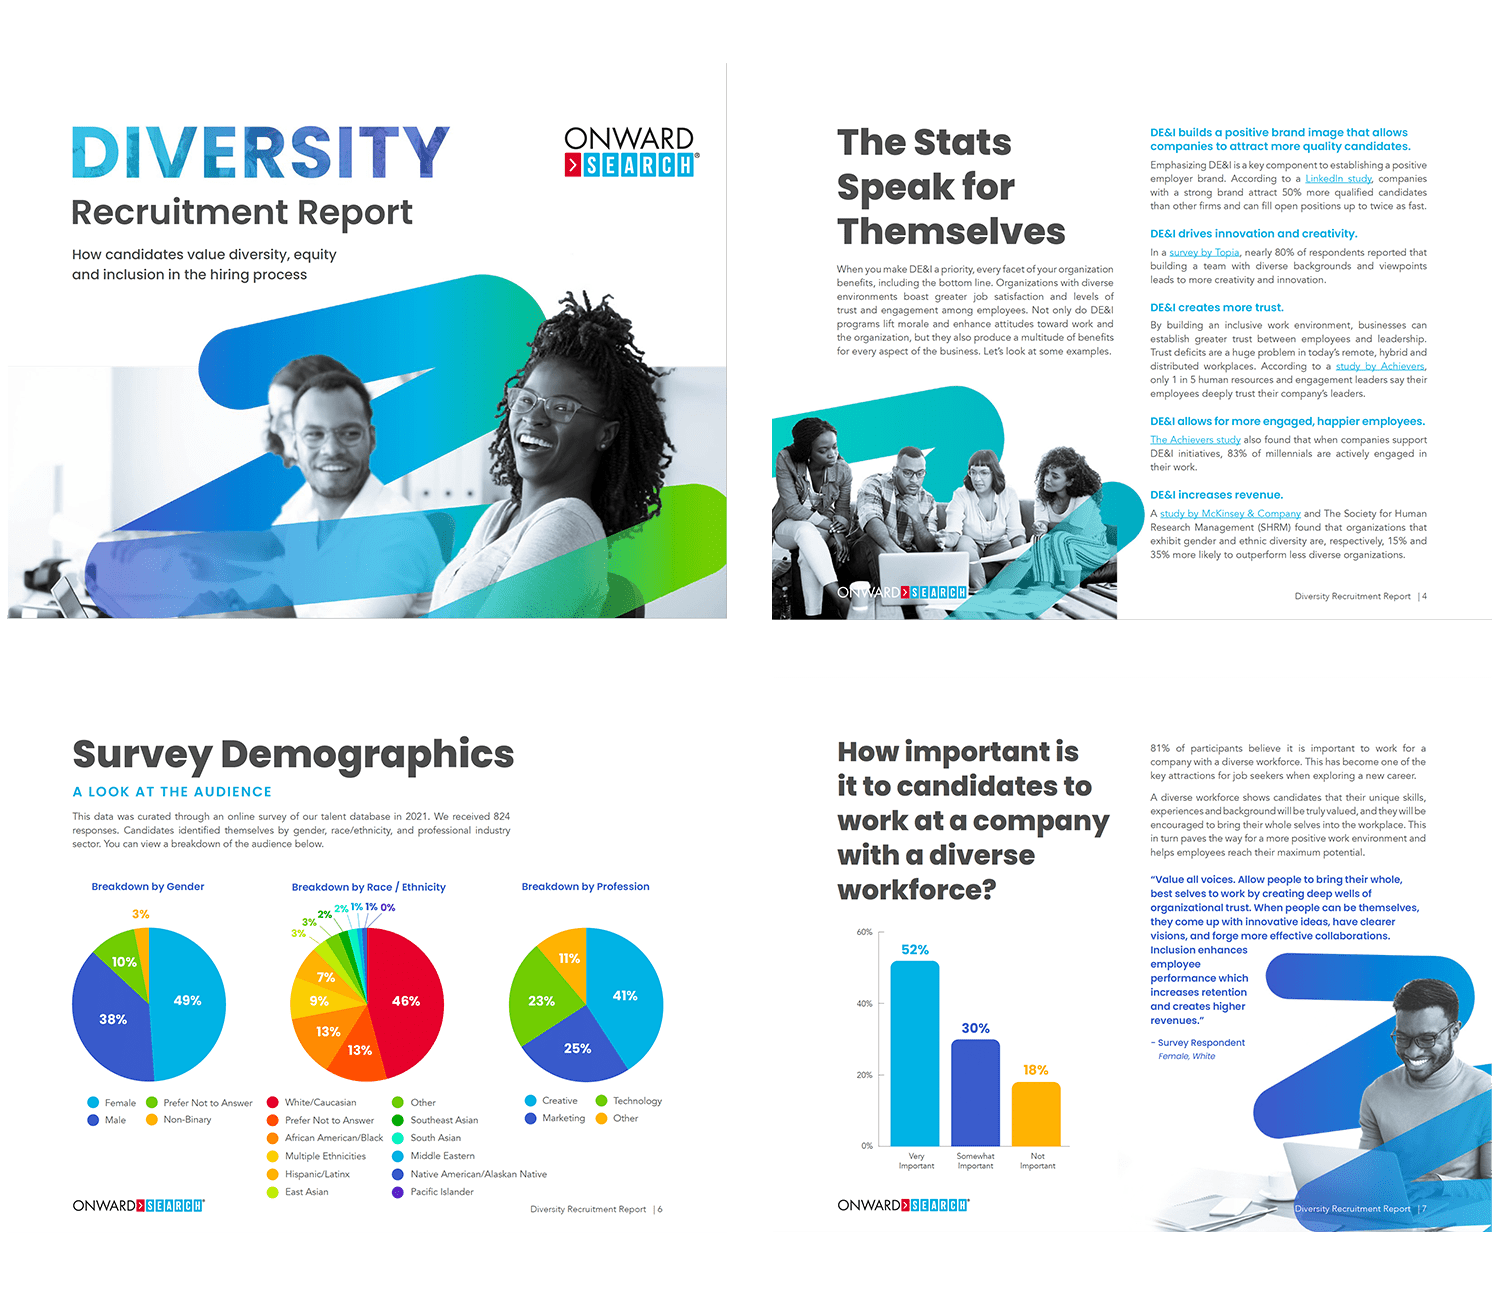 View the Onward Search Diversity Recruitment Report